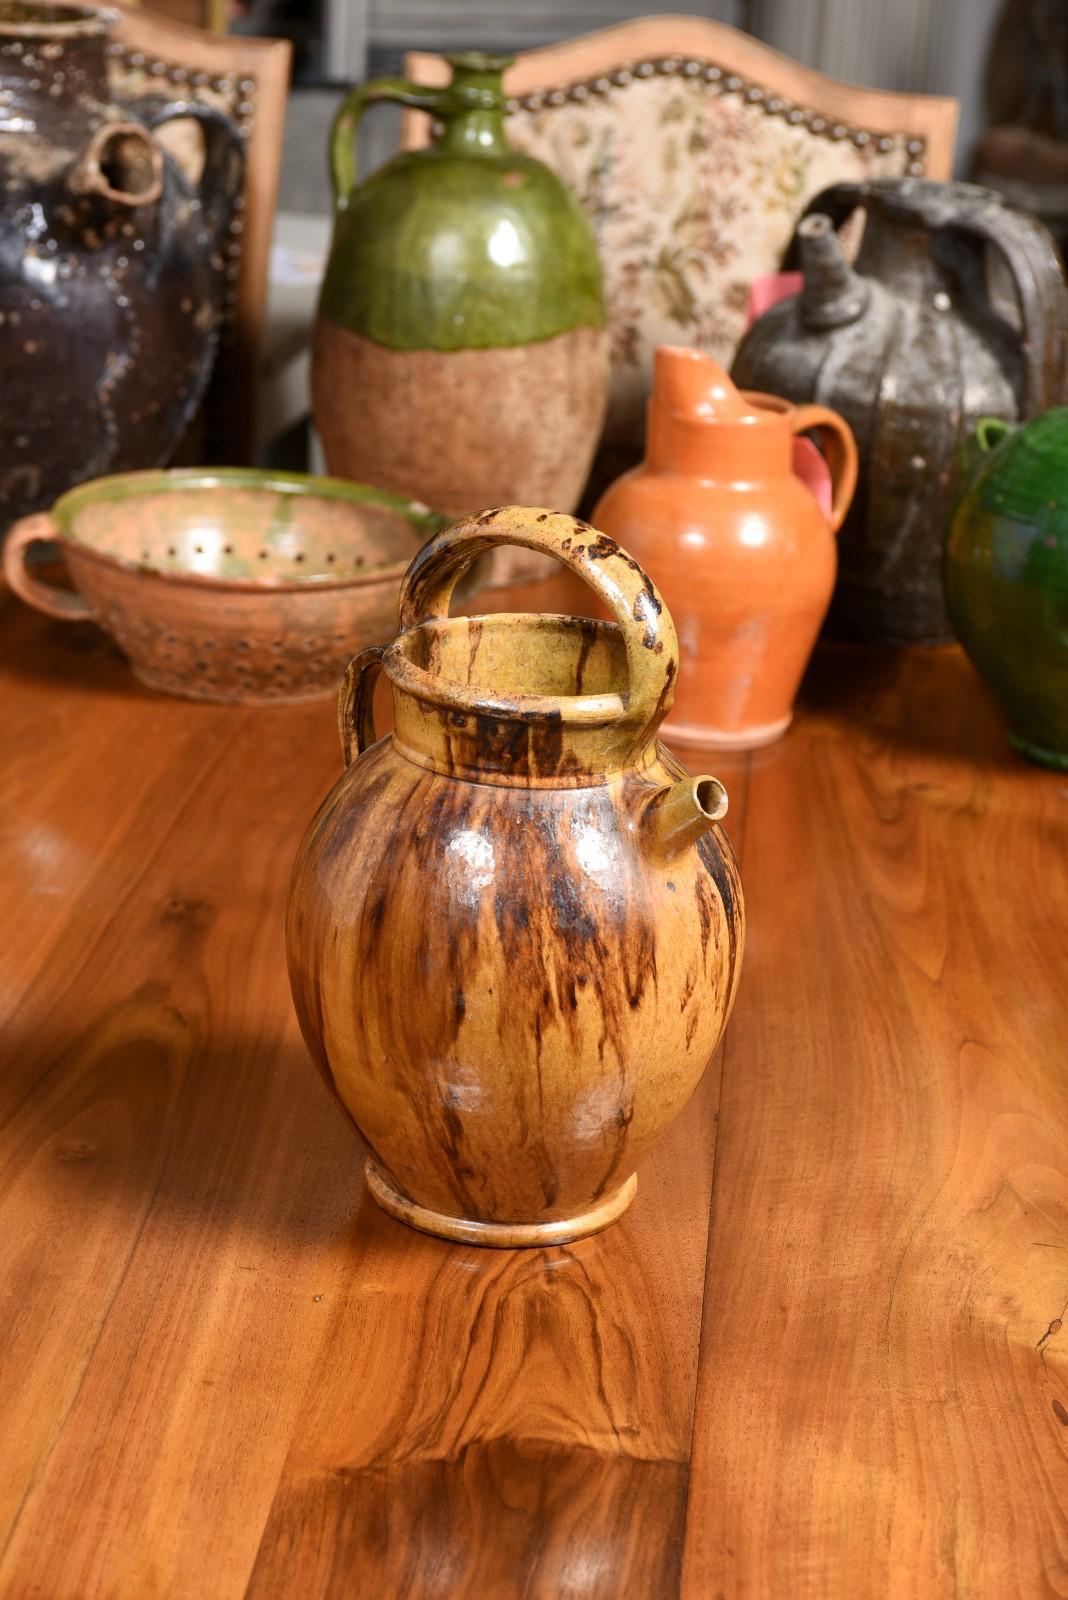 Rustic French 19th century pottery olive oil jug with front spout, large upper handle and back one. This 19th-century rustic French pottery olive oil jug exudes an irresistible old-world allure, and stands as a testament to a bygone era, making it a